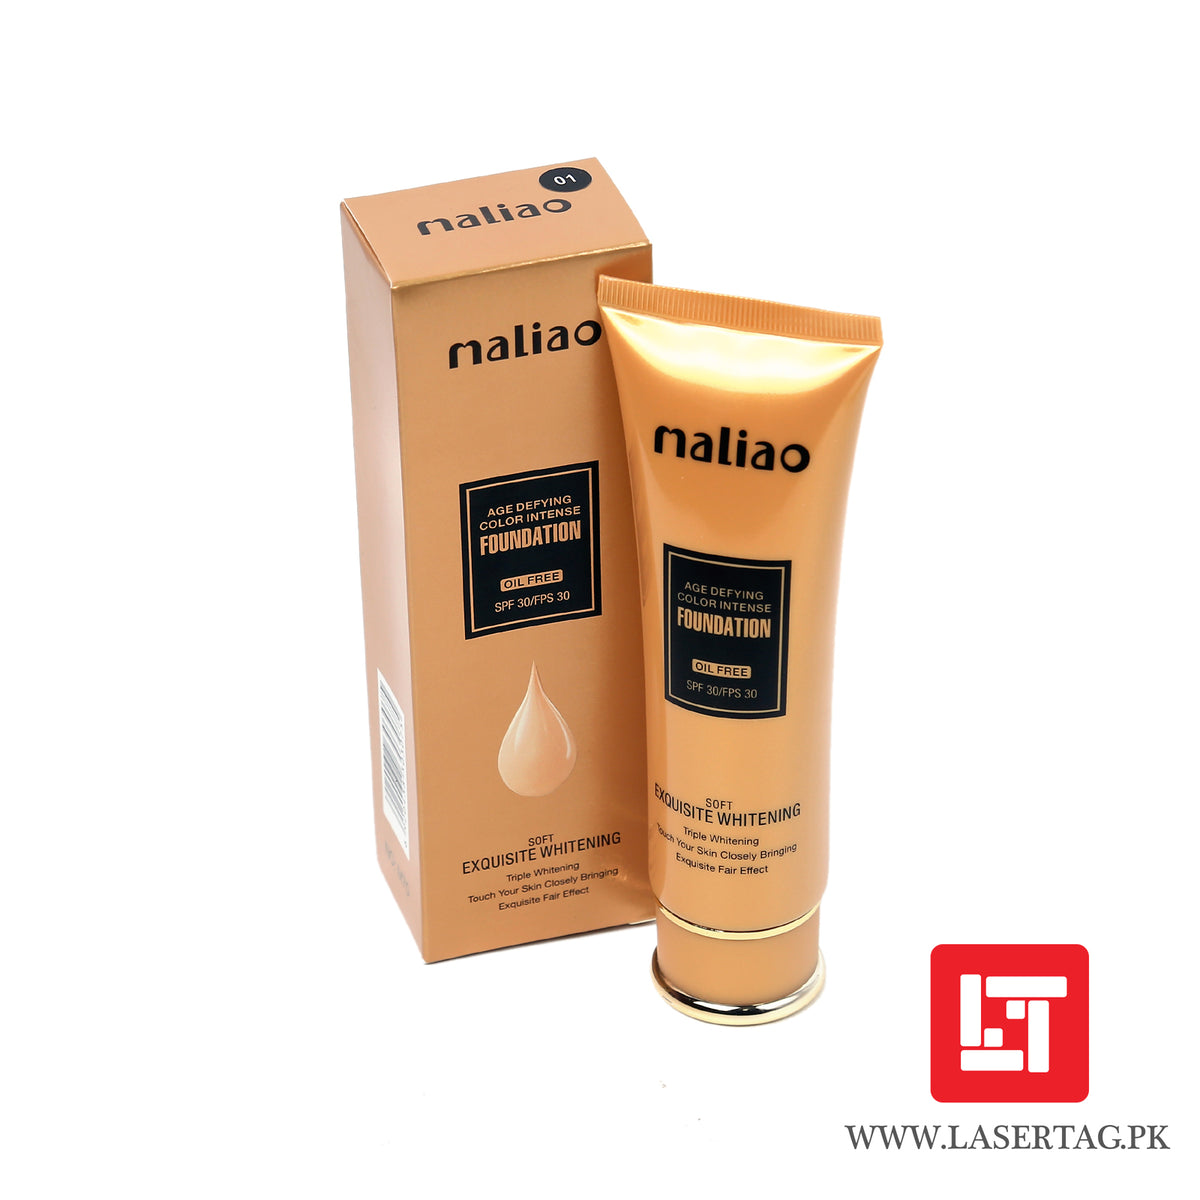 Maliao Age Defying Color Intense Foundation Oil Free Soft Exquisite Whitening M70-01 80g freeshipping - lasertag.pk